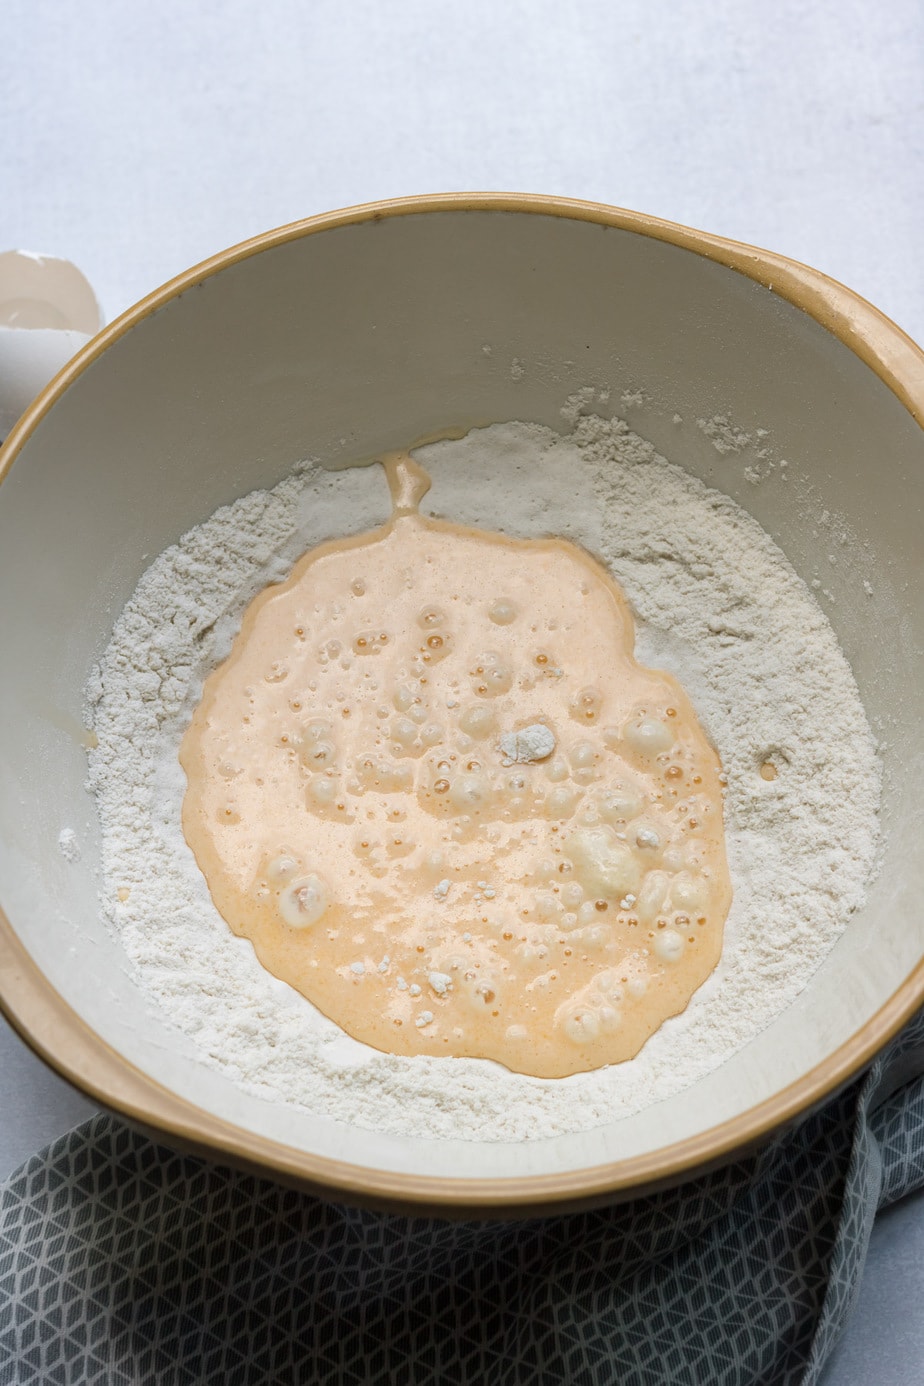 Mixing bowl of flour and whisked eggs.